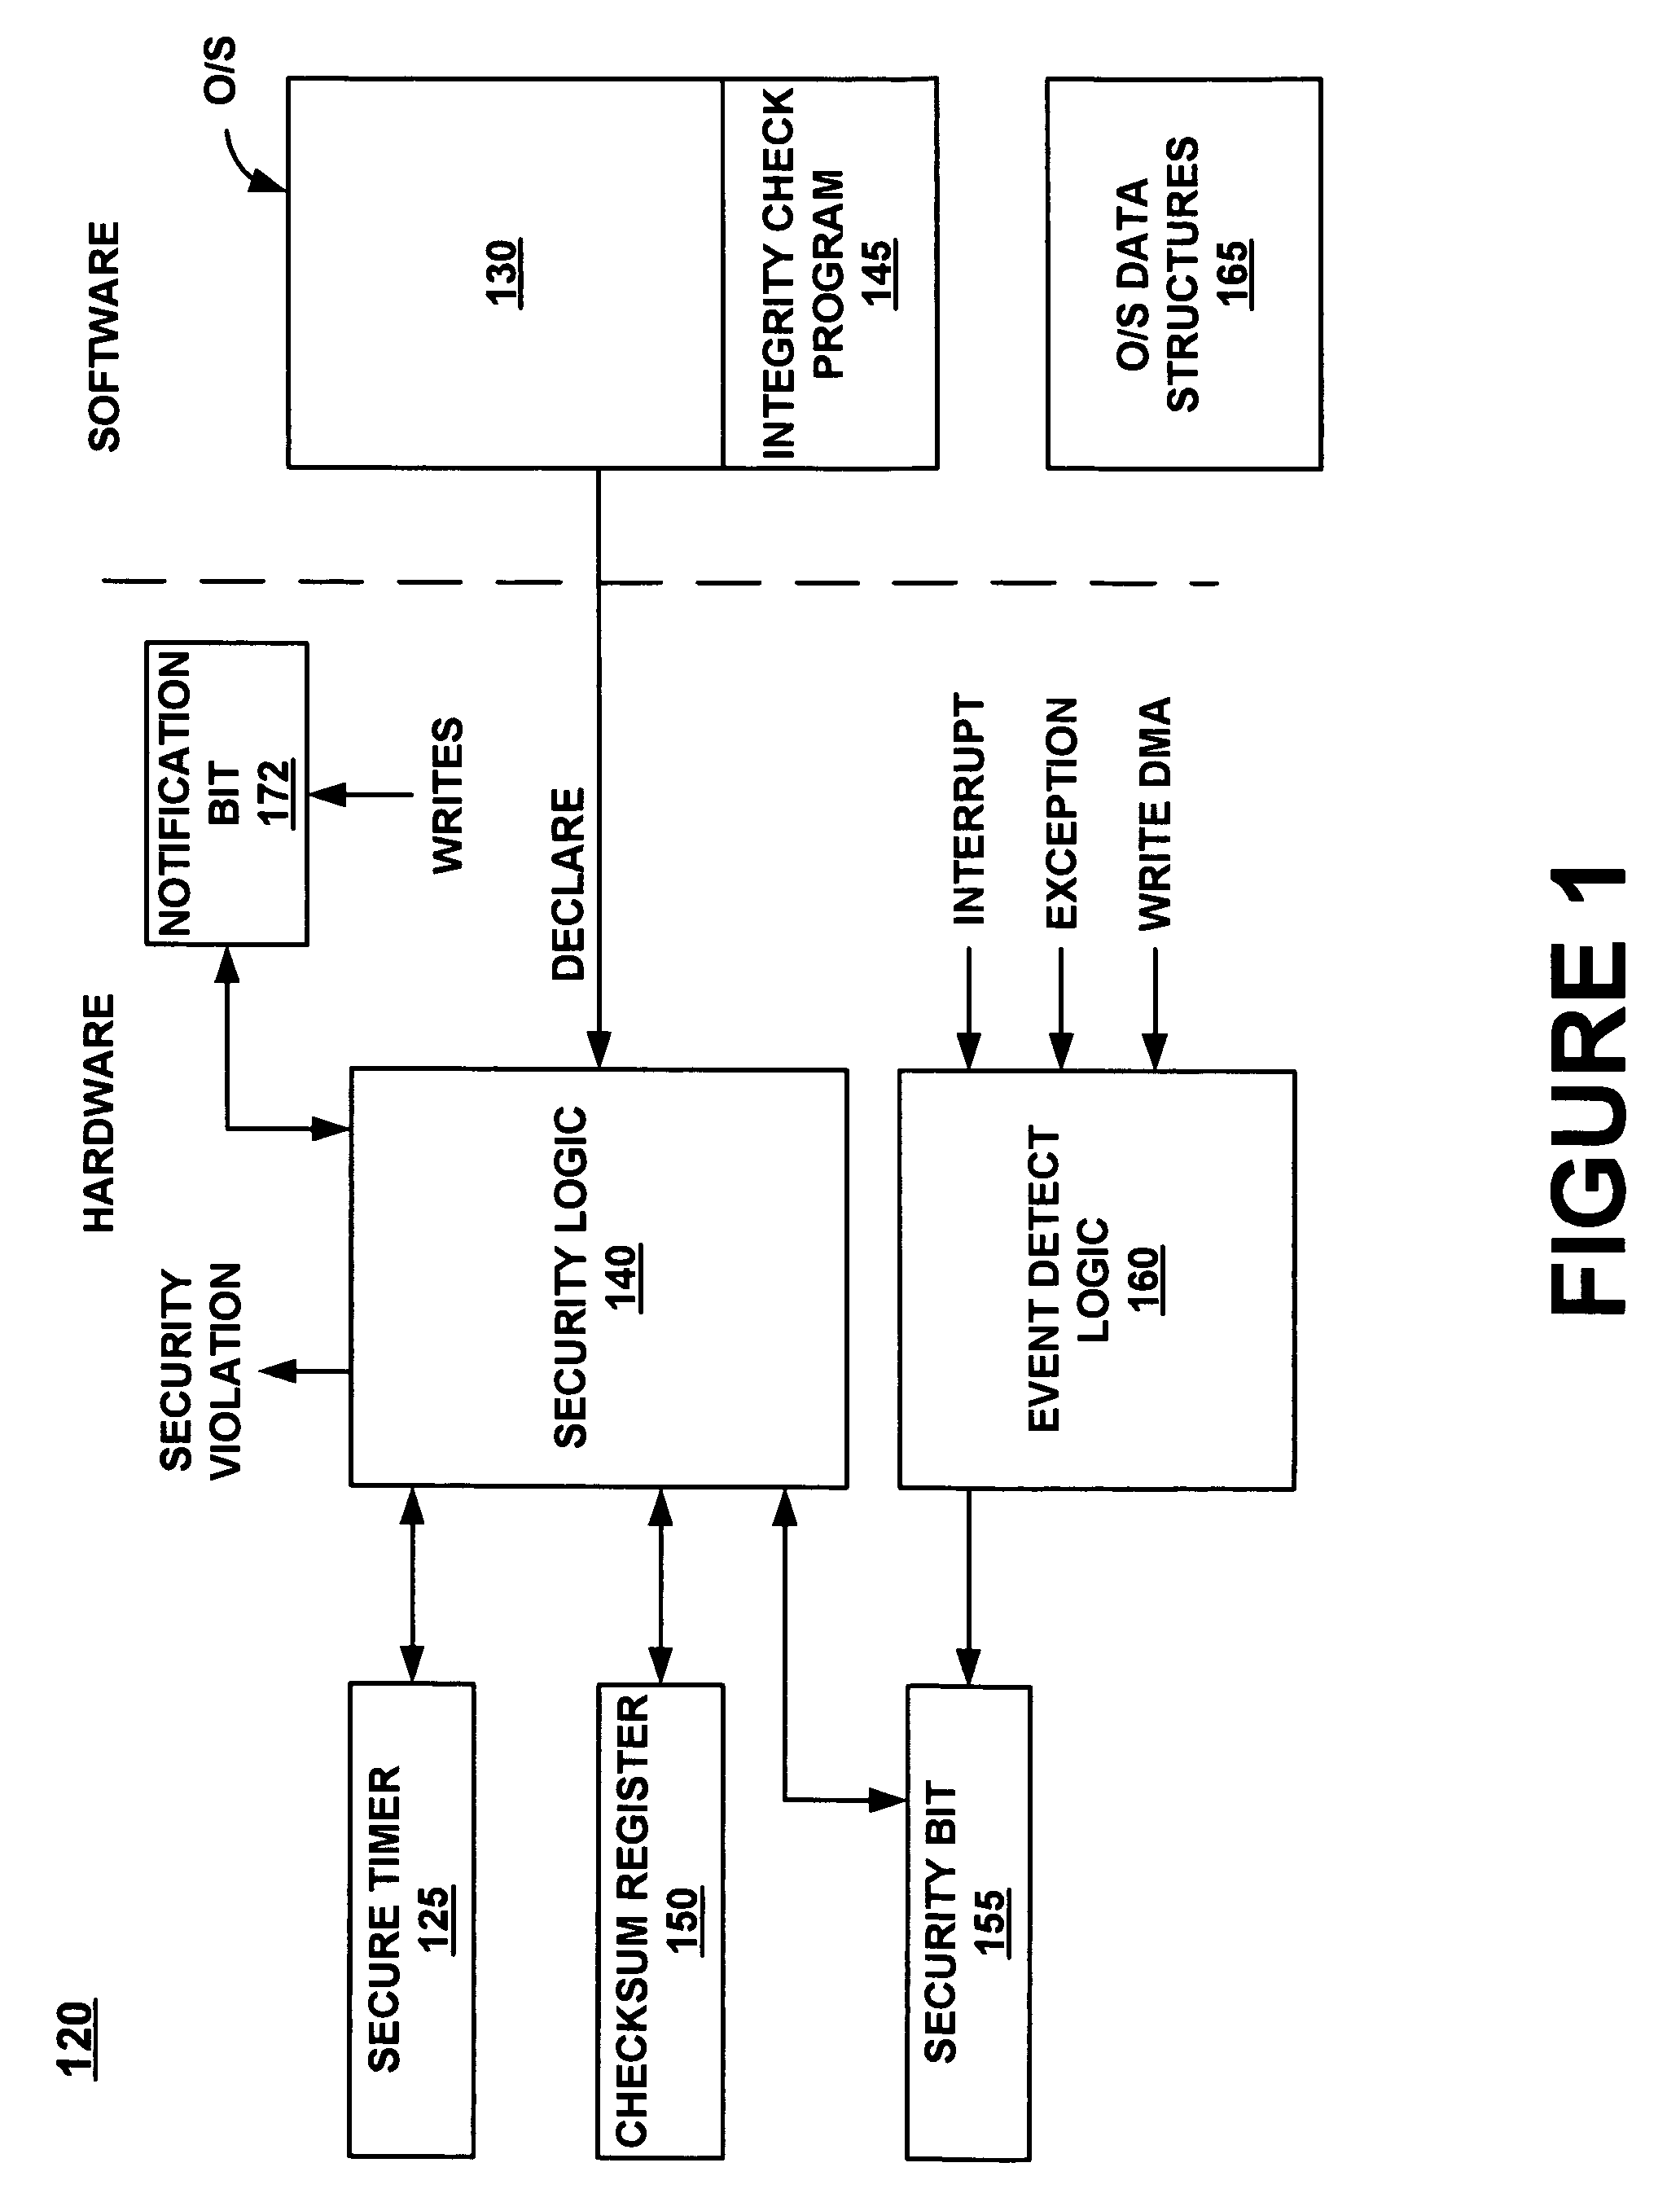 Method and system for validating a computer system